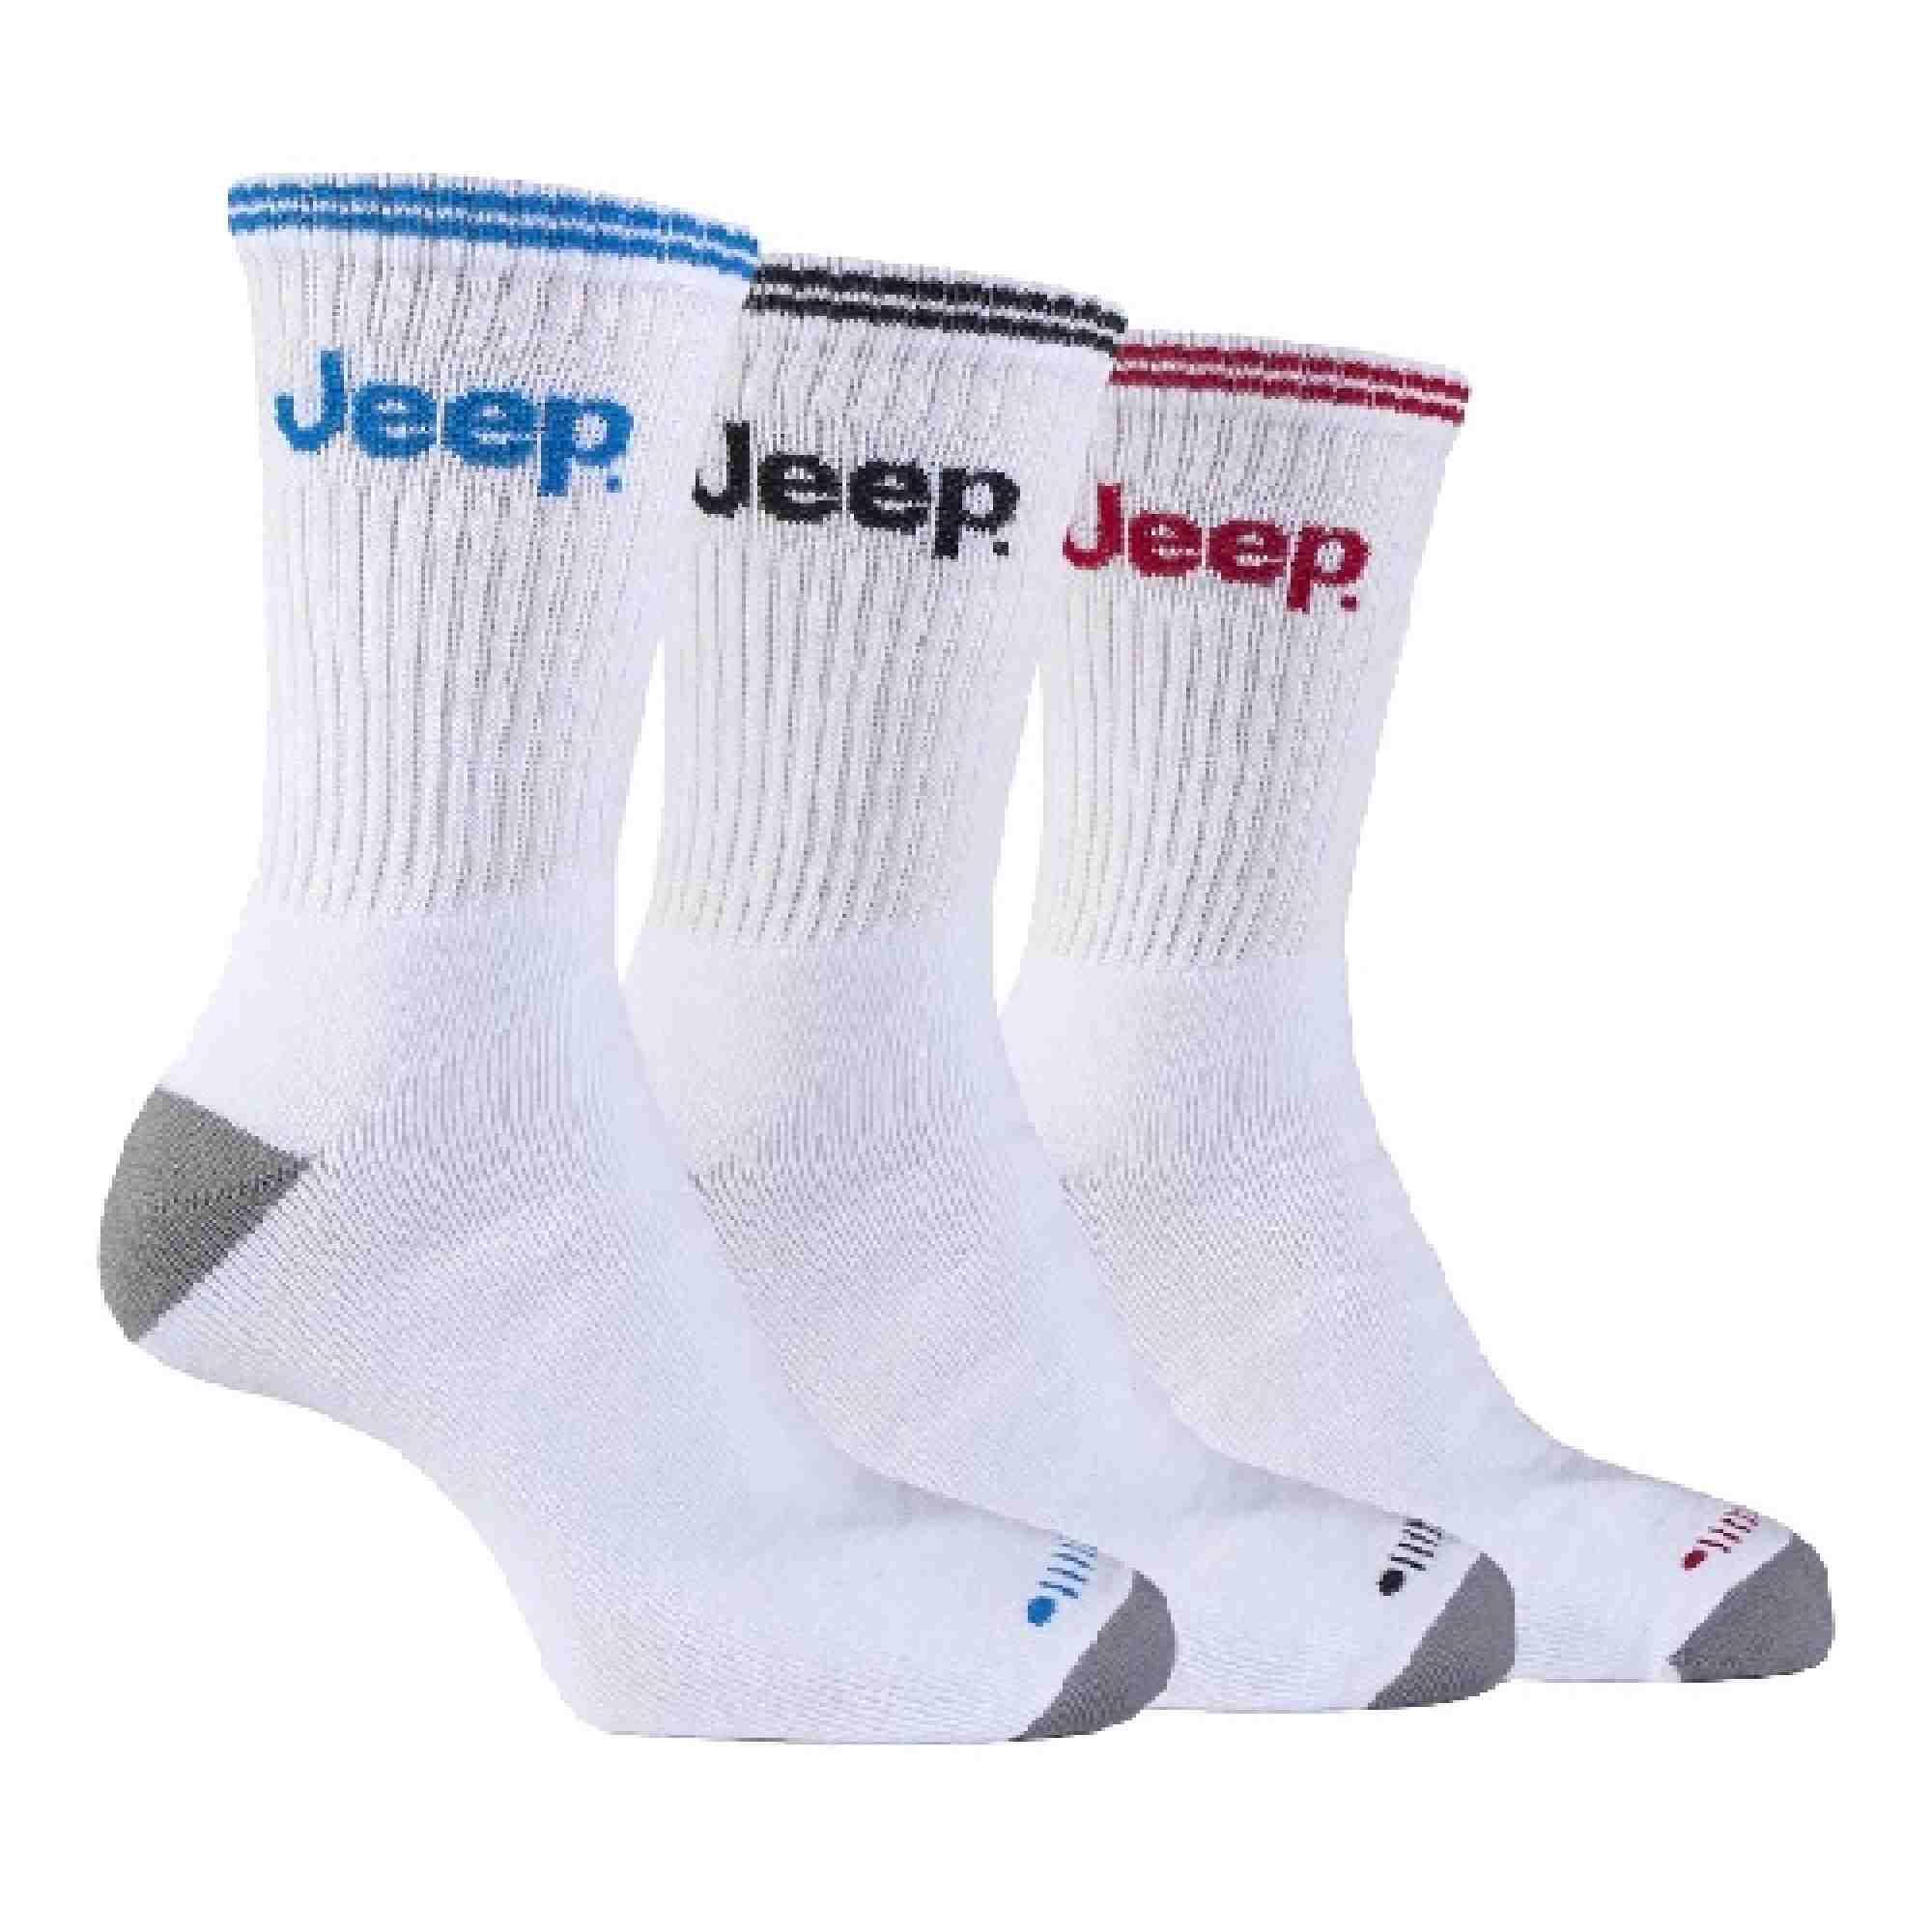 3 Pairs Mens Cotton Thick Cushioned Terry Sport Socks with Retro Stripe 1/4